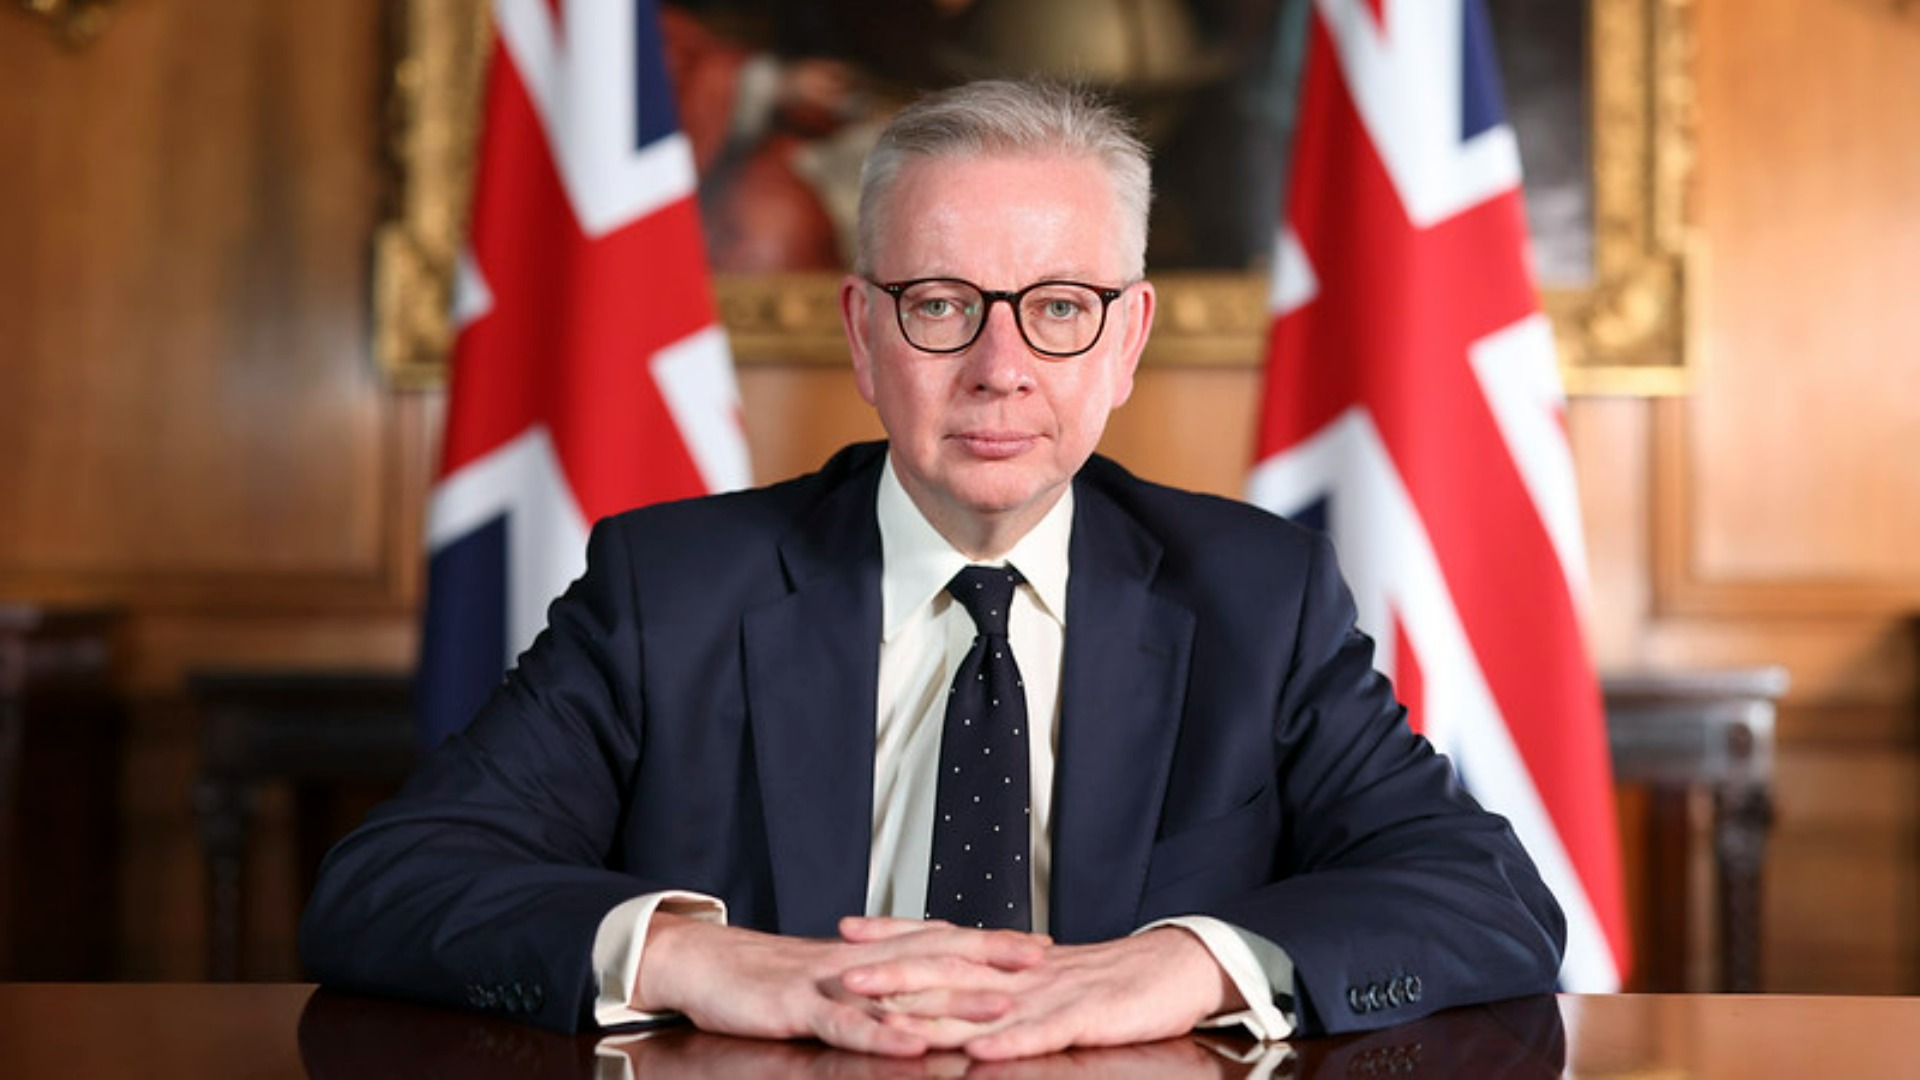 Michael Gove will launch a UK refugee scheme on Monday.